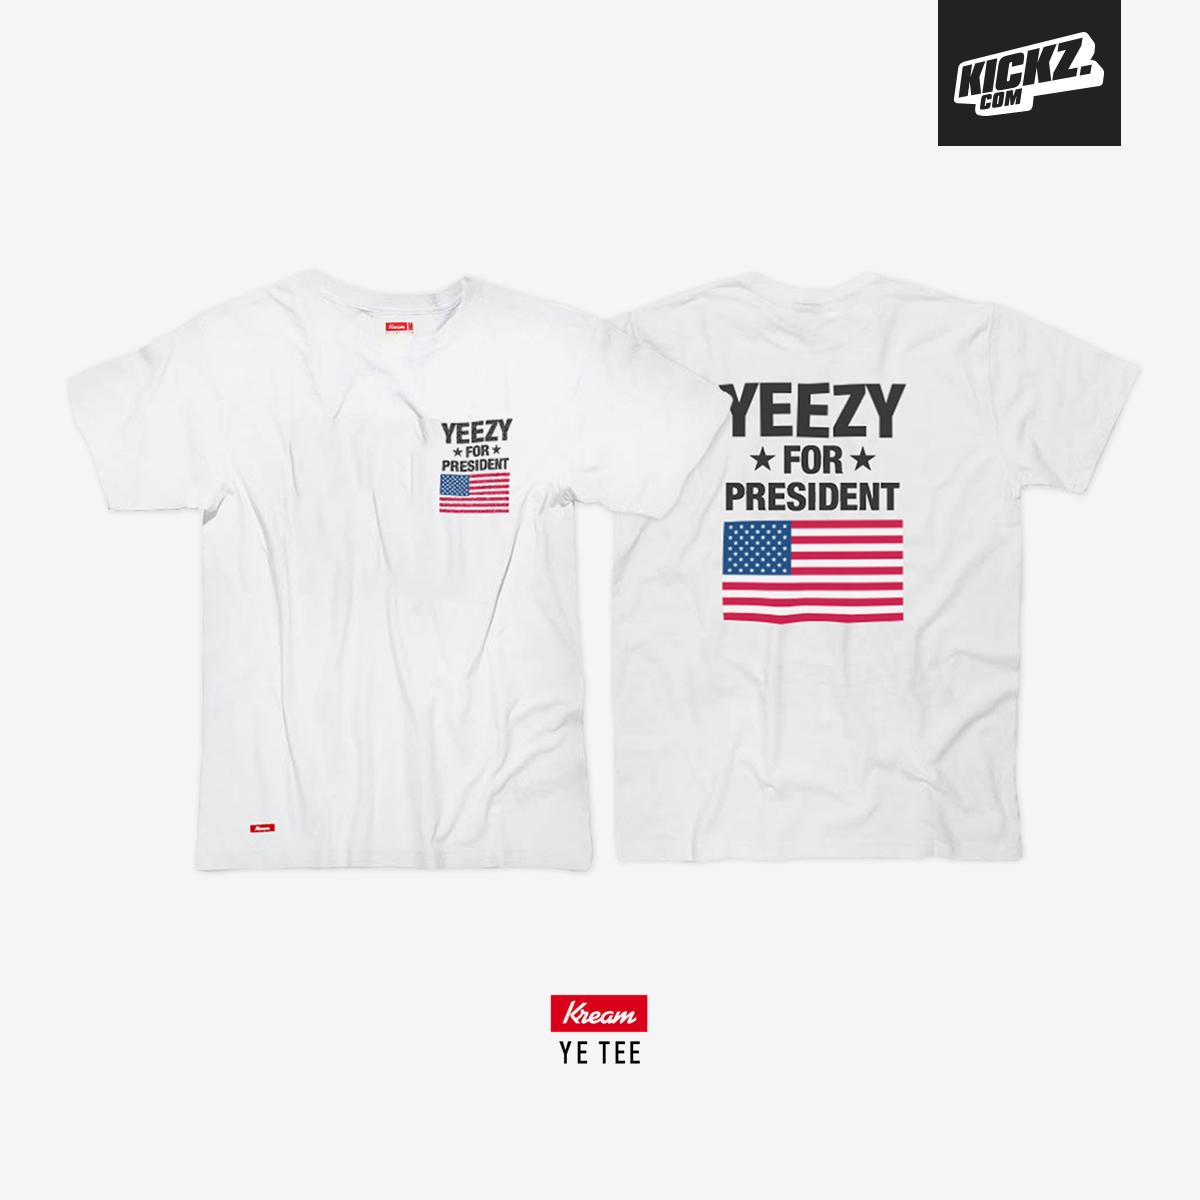 KICKZ on Twitter: FOR PRESIDENT! The KREAM YE Tee is available now. Get yours at https://t.co/xdKTNG9YnZ http://t.co/vx9G9TRHad" / Twitter